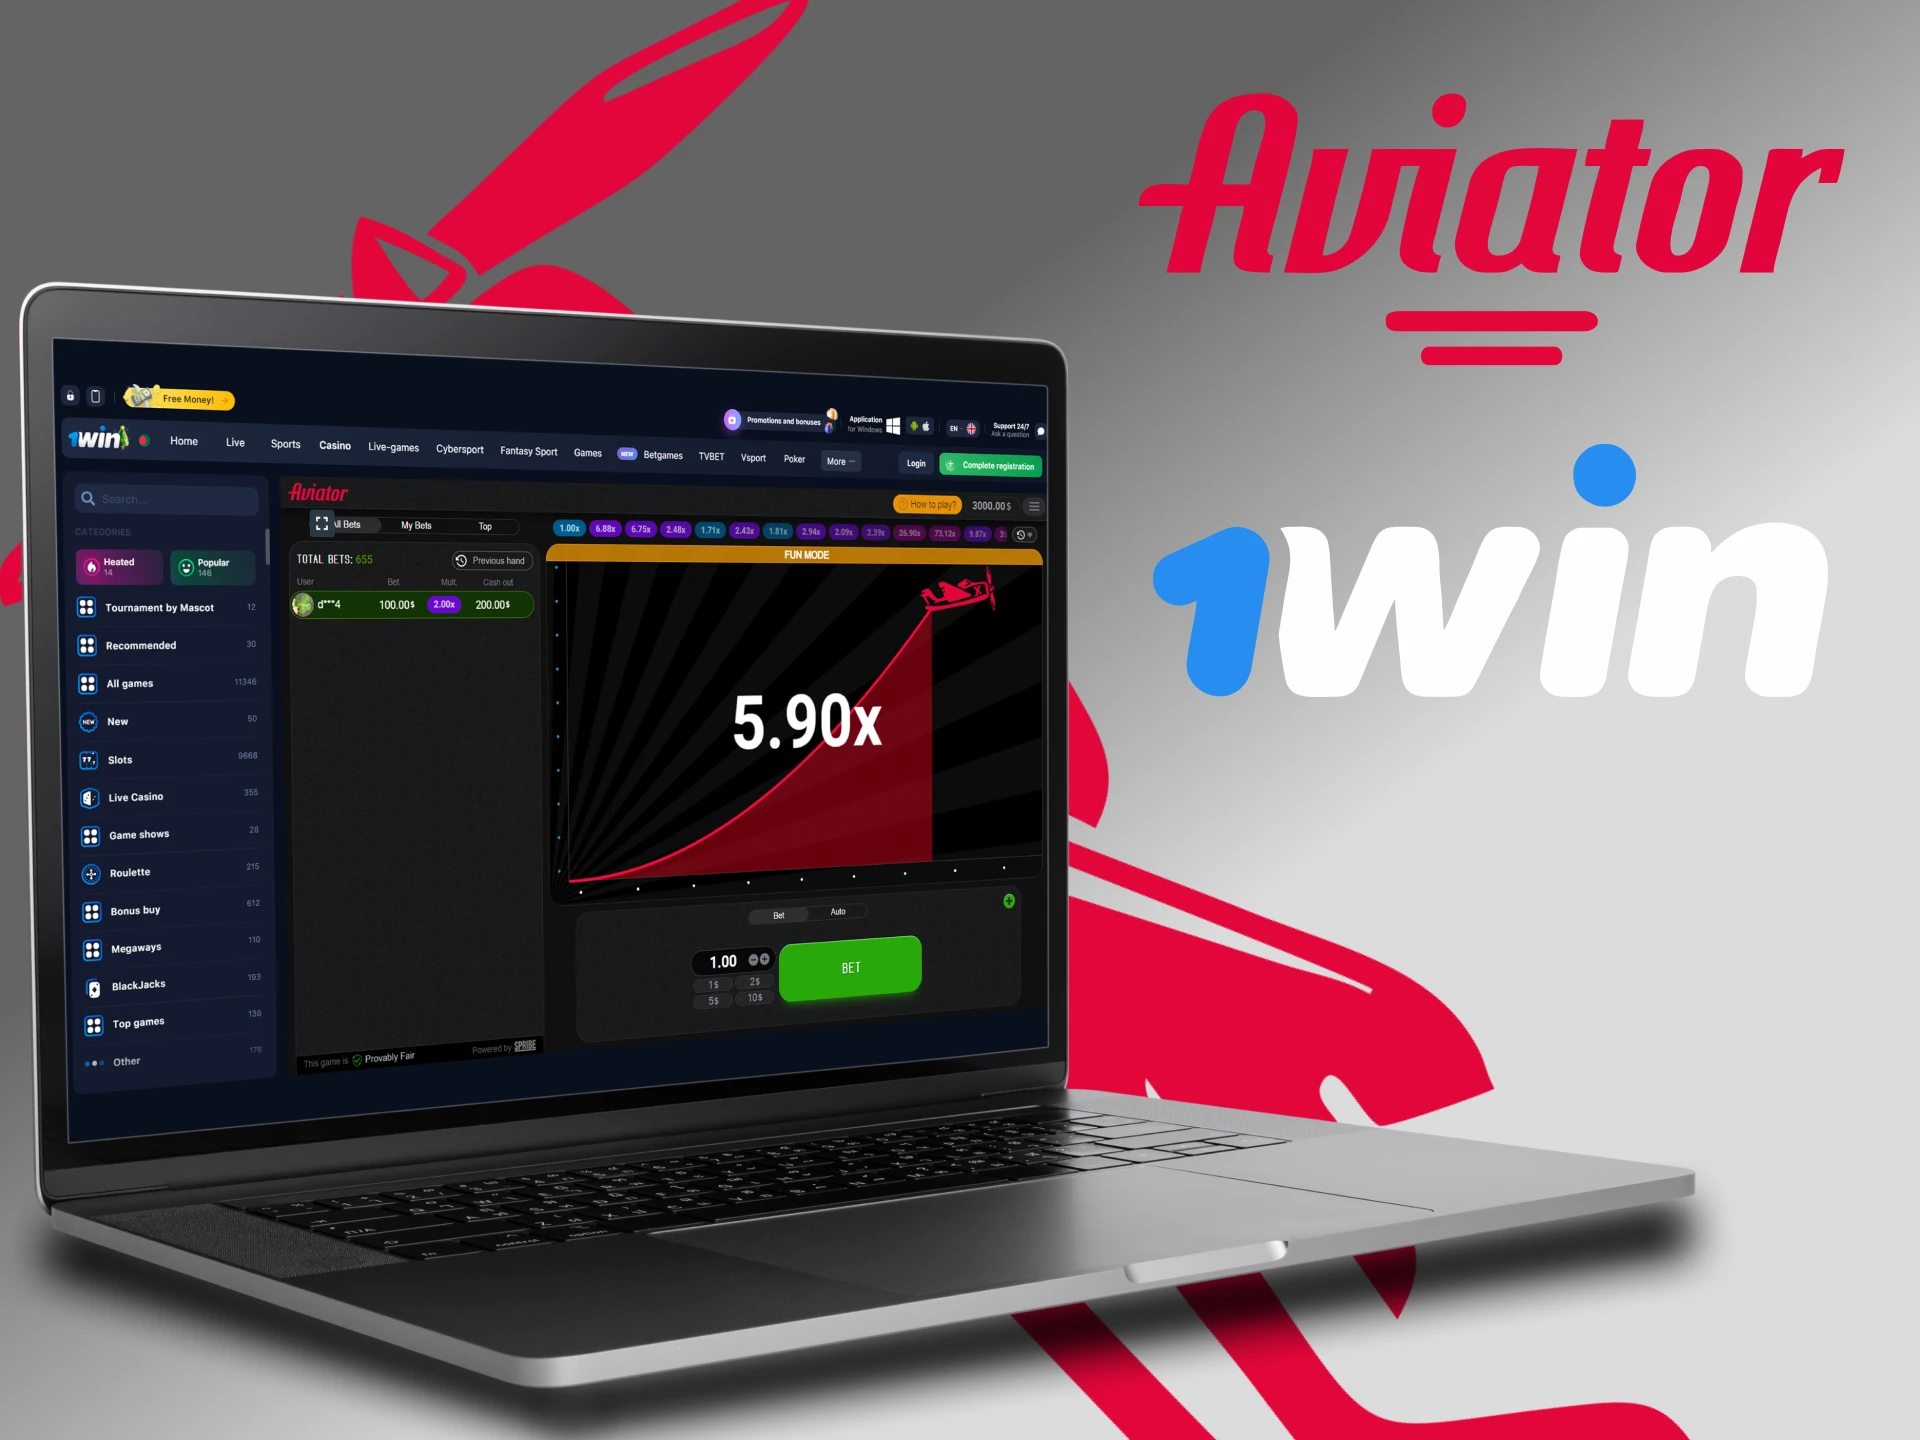 You can play the Aviator game on the 1win website.